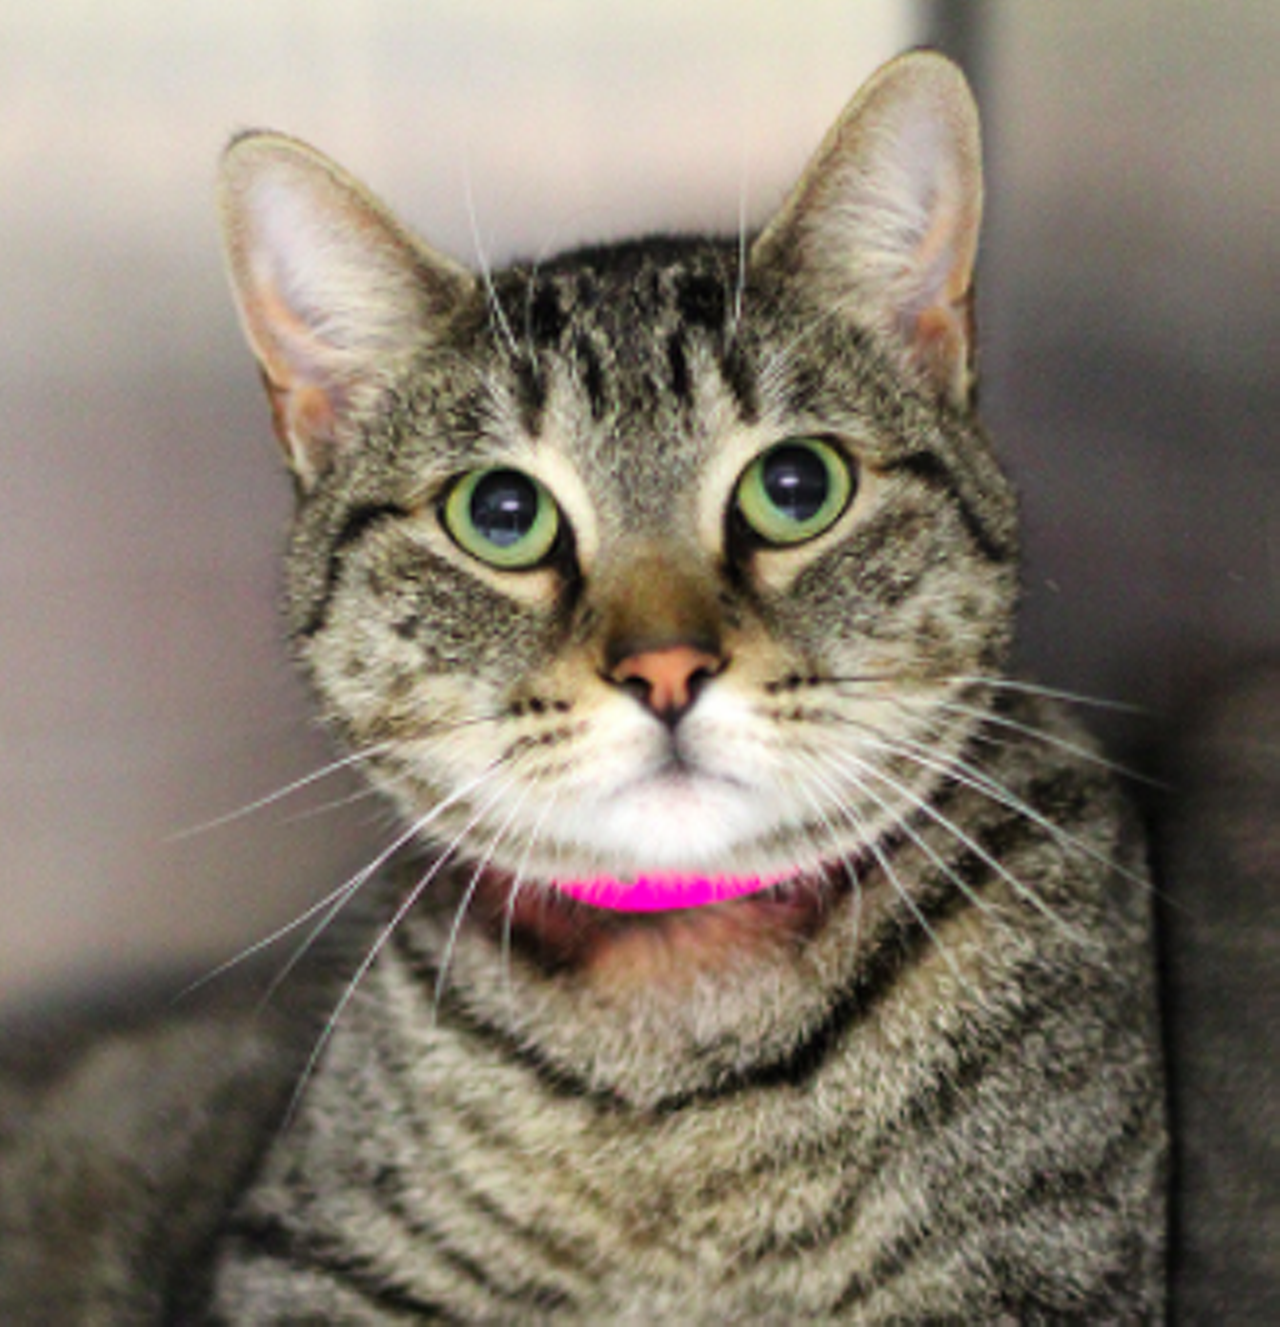 Nancy
"Hi, I’m Nancy! Just look into my soulful green eyes and give me the chance to win your heart over! I am a sweet and nice kitty. I haven’t been here too long and I hope that I can charm my way into my person’s house soon! Now where could my person be? Could it be you?"